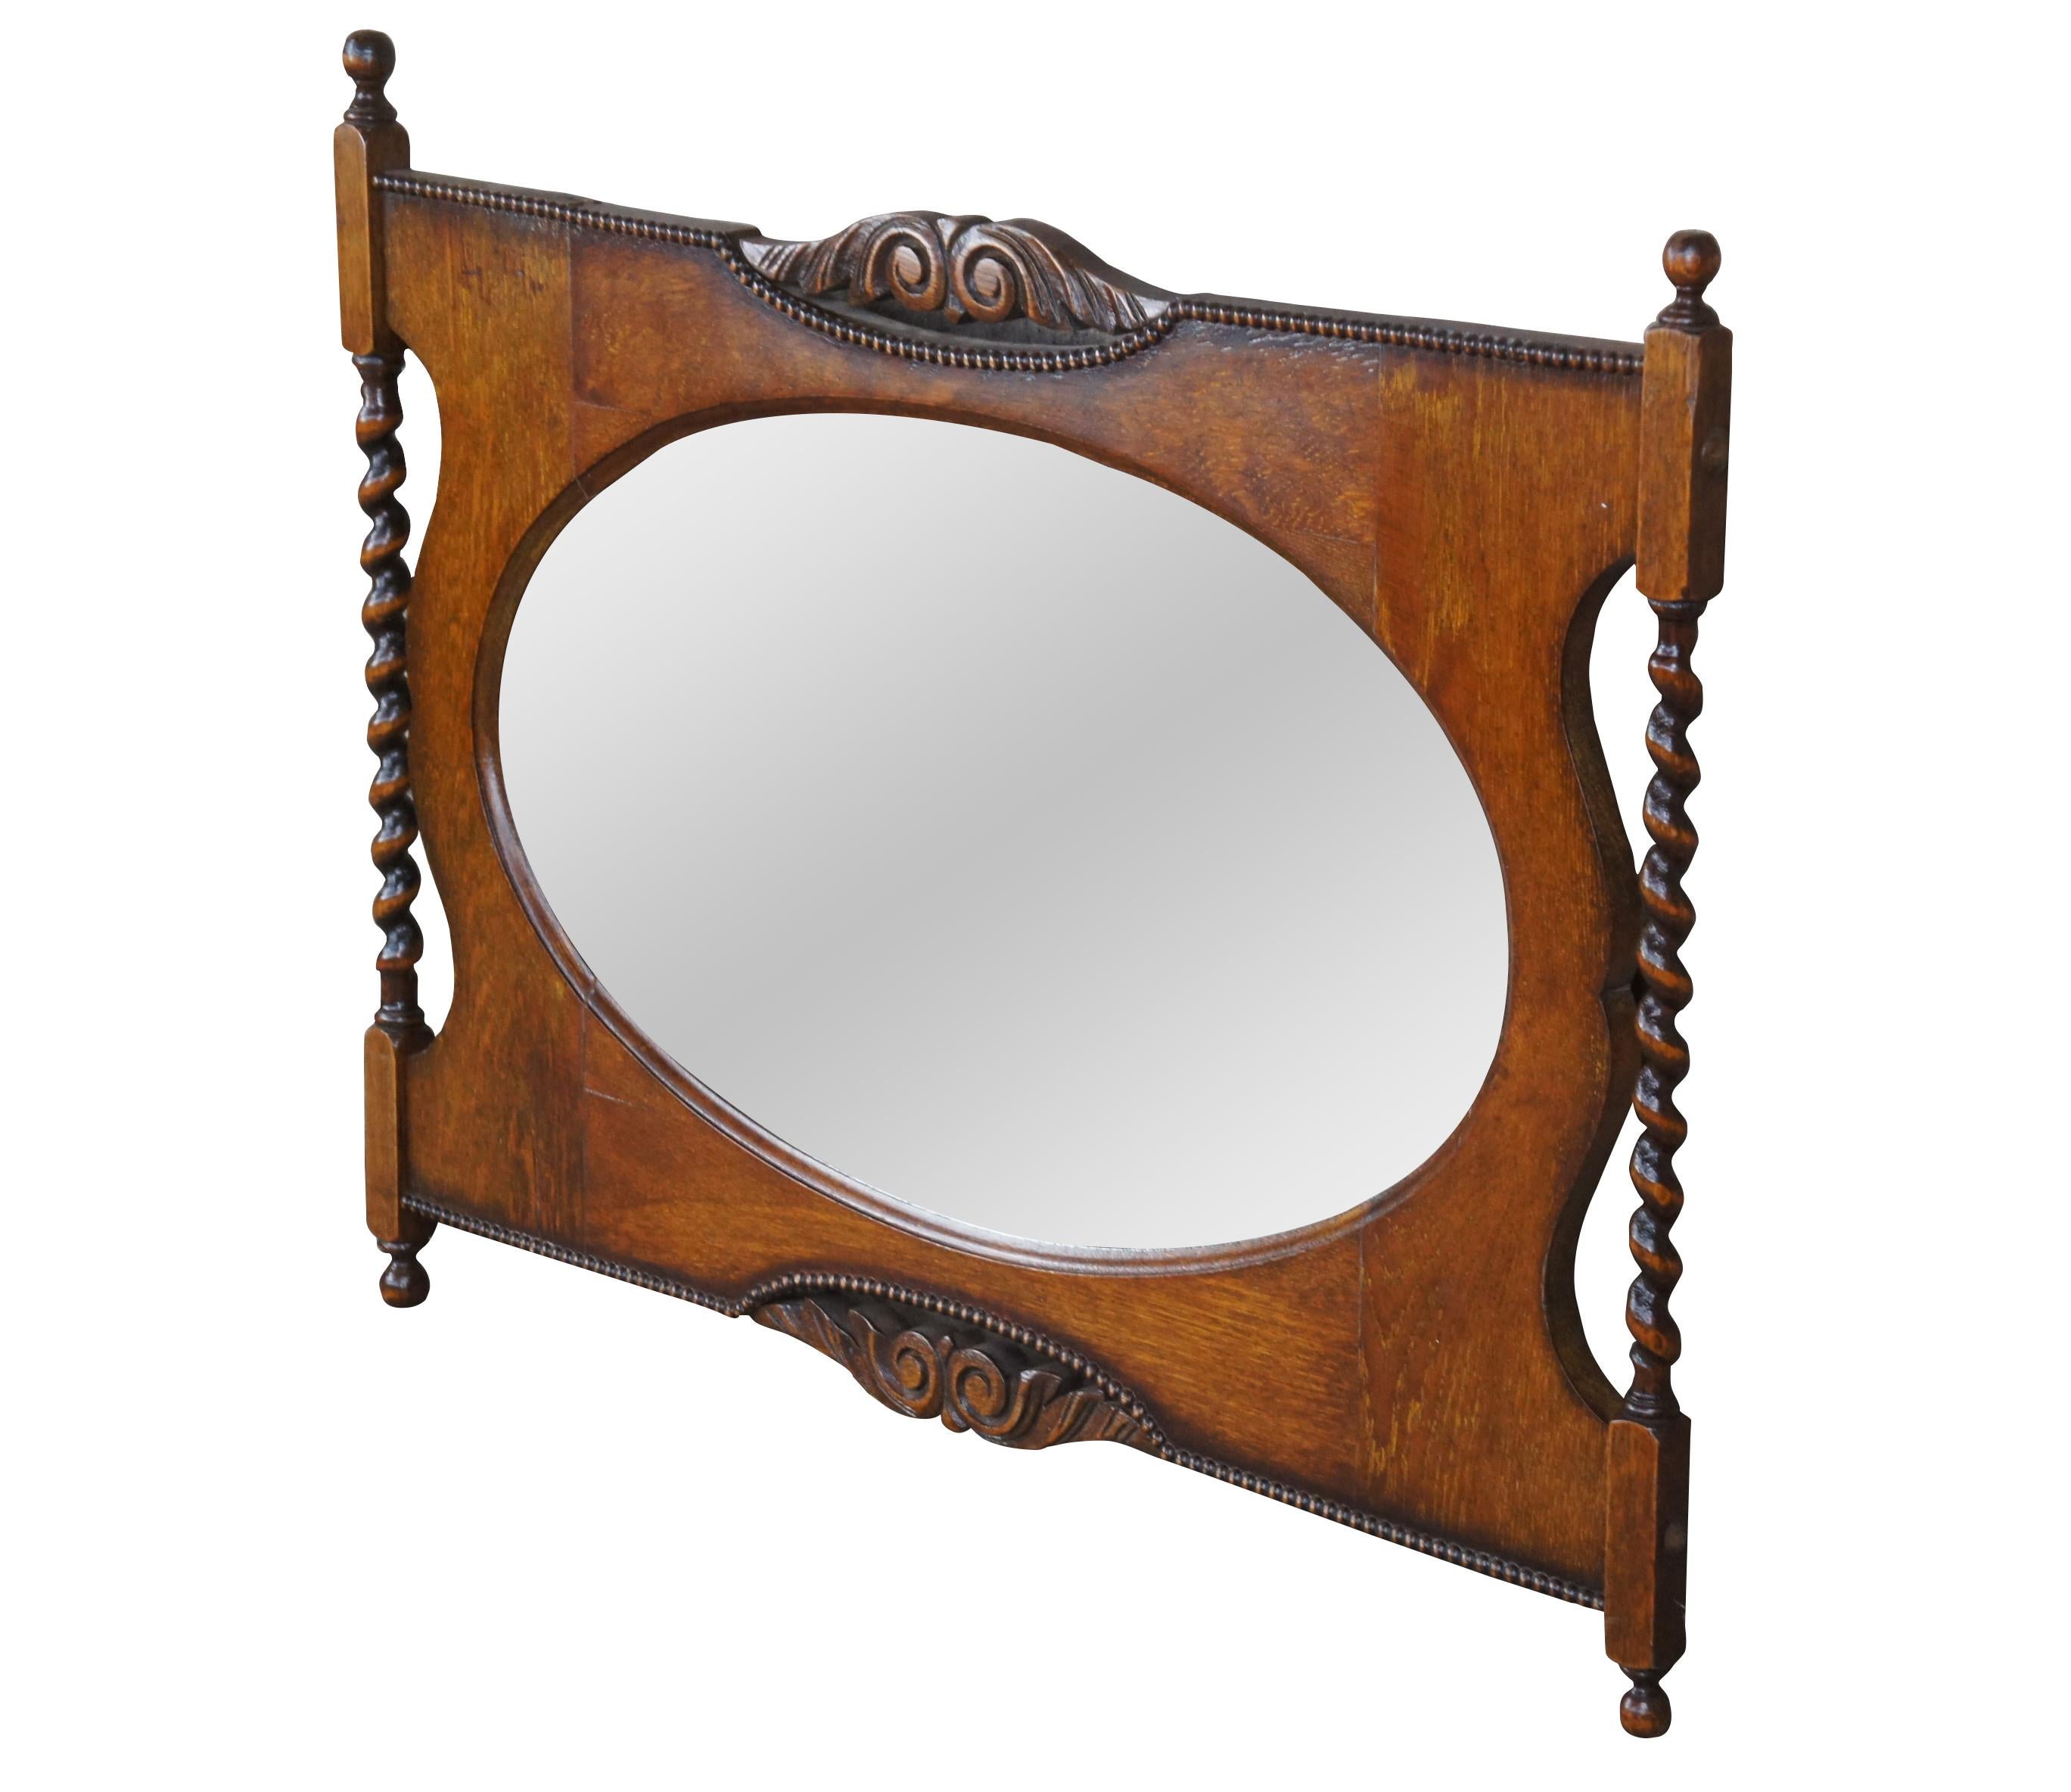 Antique Victorian parlor vanity mirror.  Made of quartersawn oak featuring ornate accents with gadrooned edge, ornate carvings, barley twisted supports and beveled oval mirror. 

Dimensions:
34